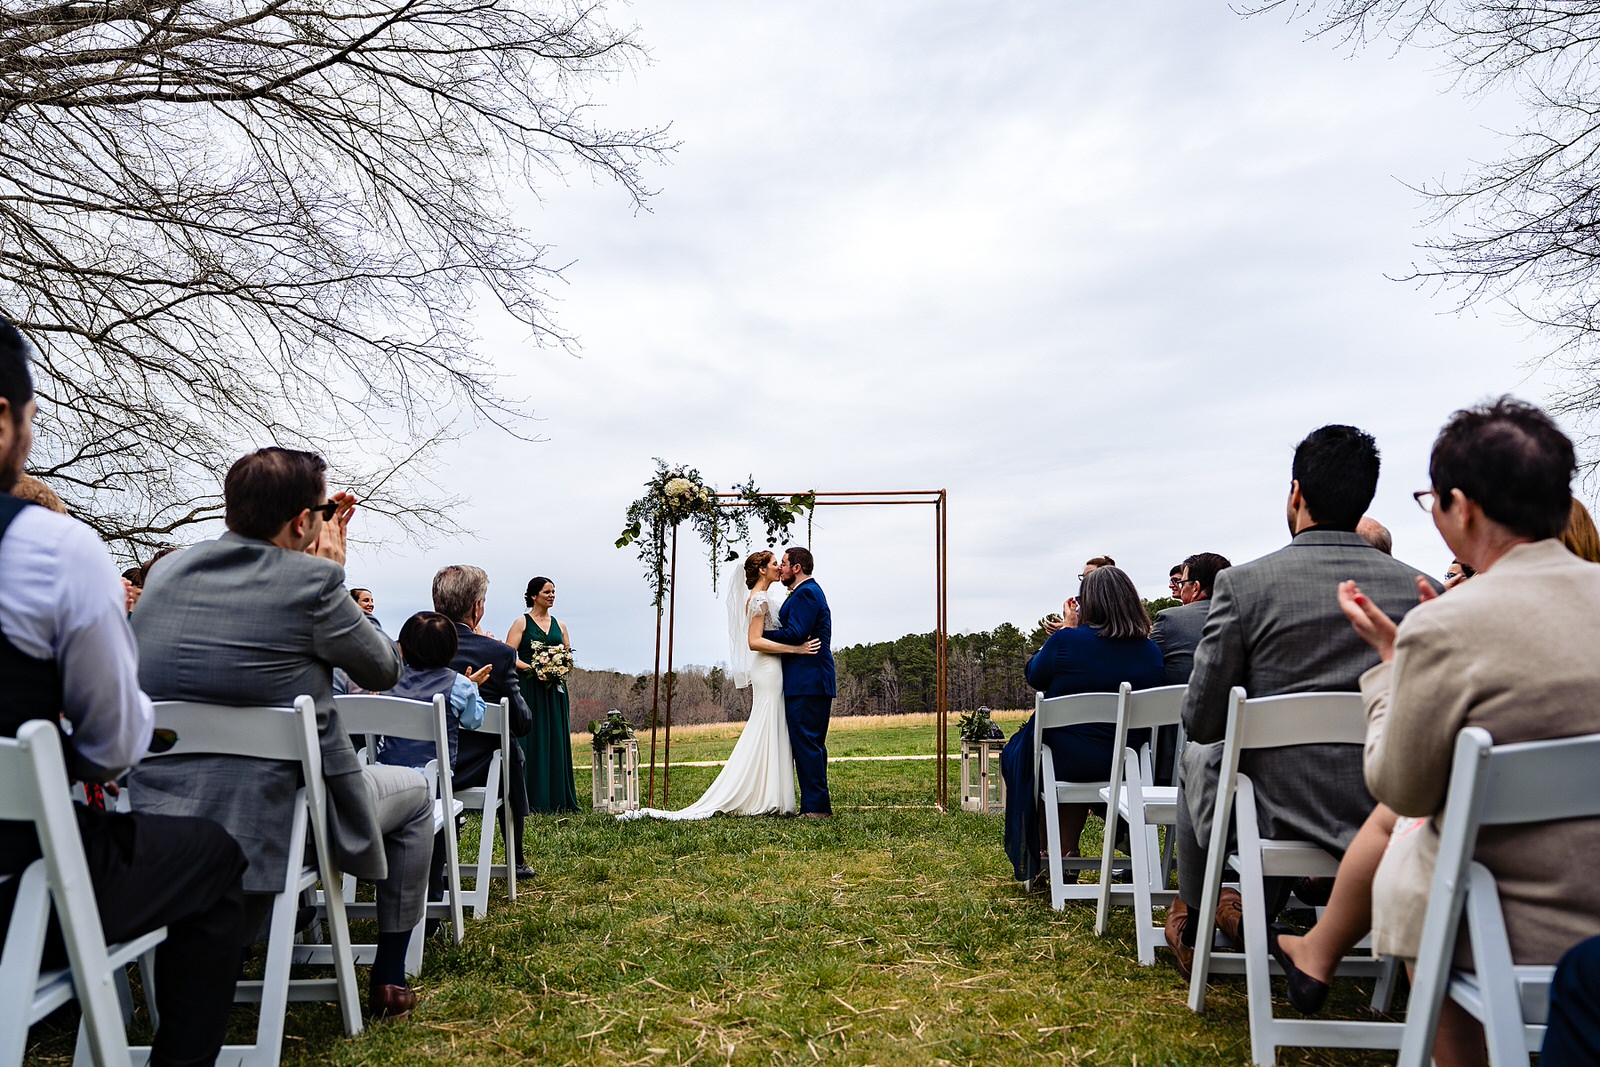 Outdoor wedding ceremony at The Meadows Raleigh by Raleigh wedding photographers